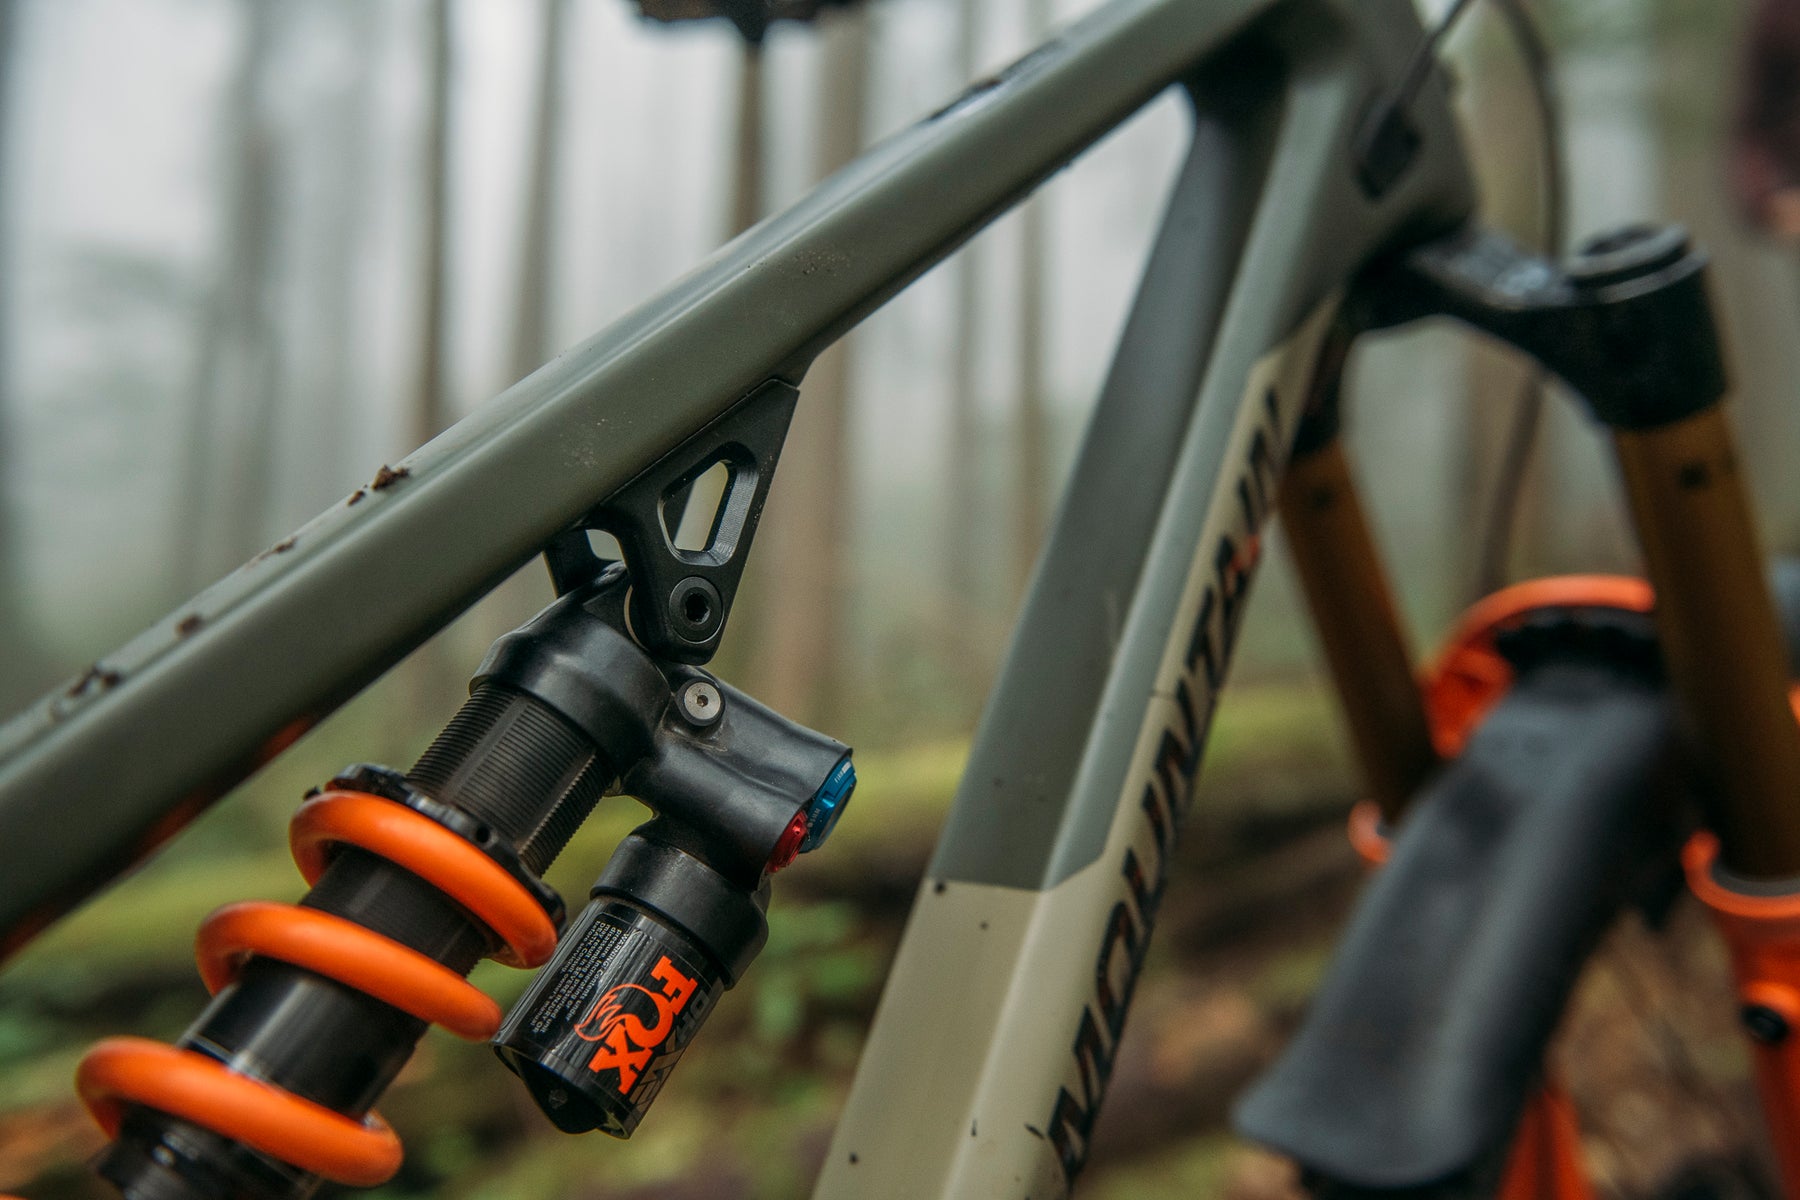 Introducing the Altitude MX Mount